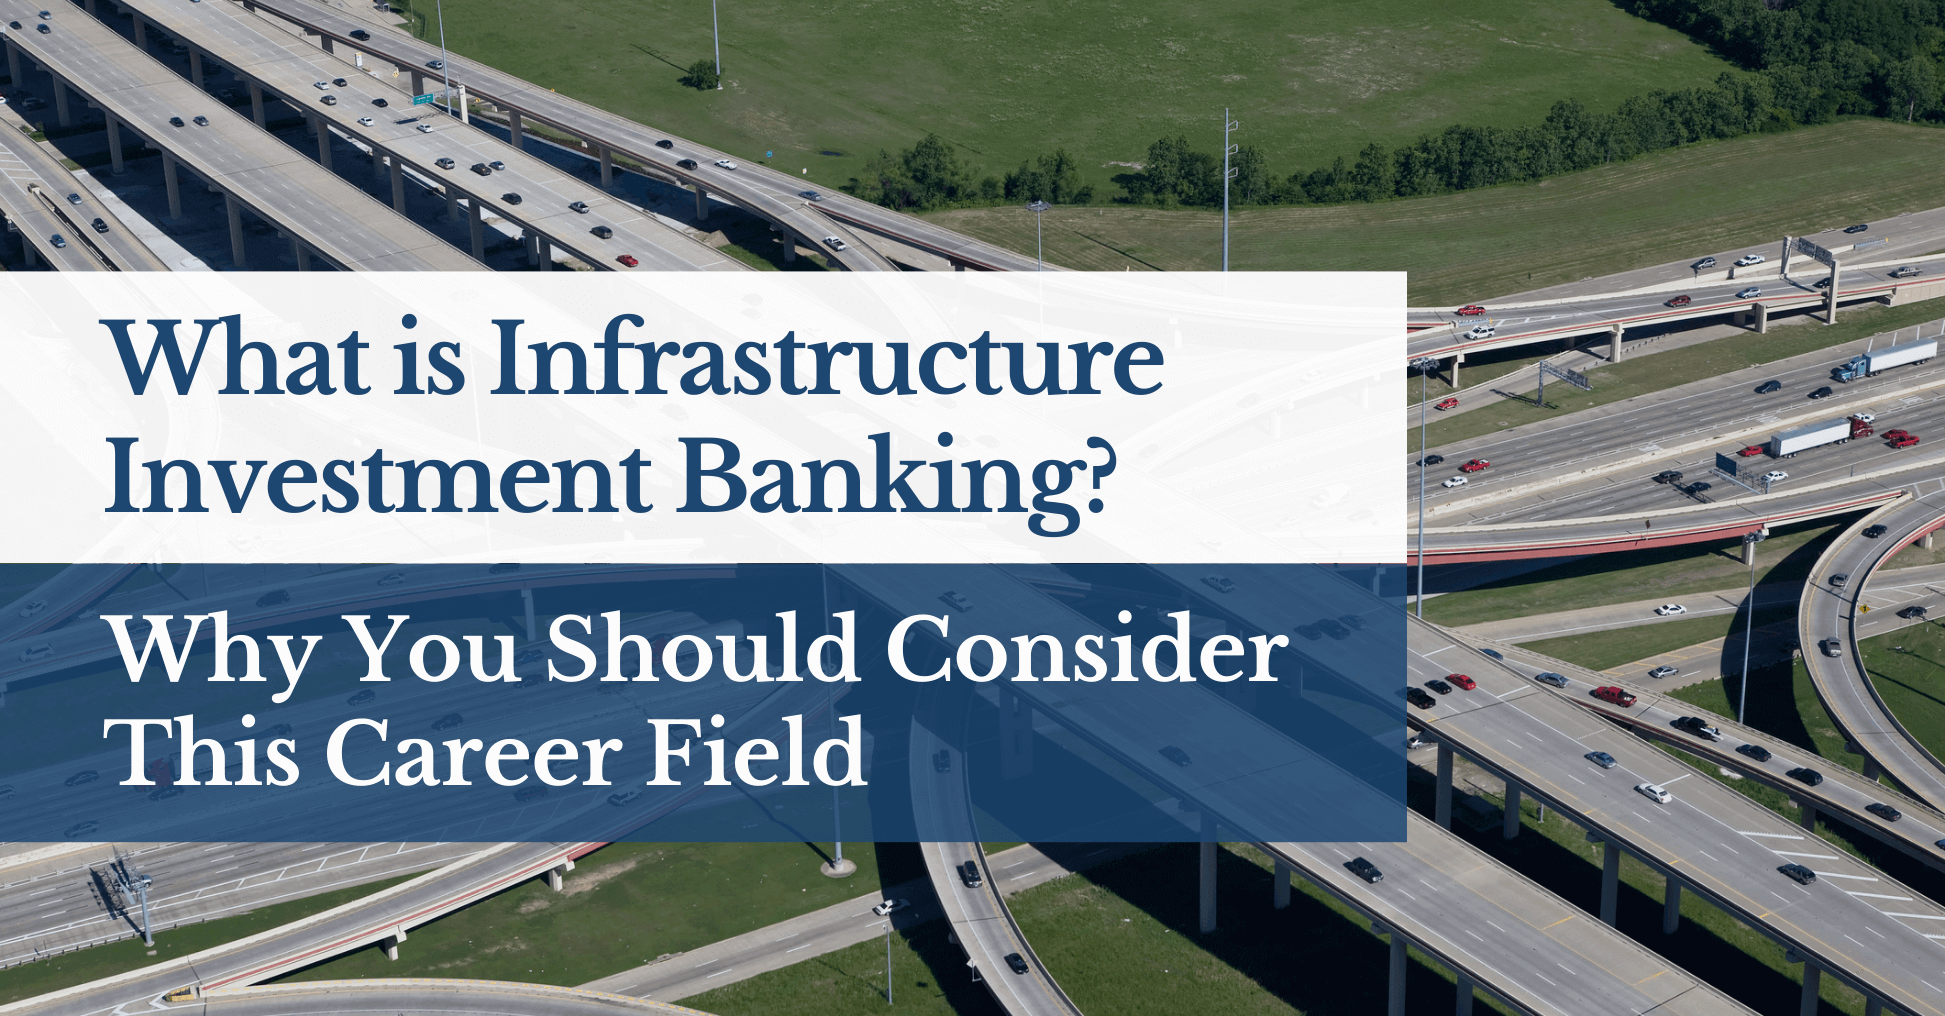 What is Infrastructure Investment Banking? Why You Should Consider This Career Field